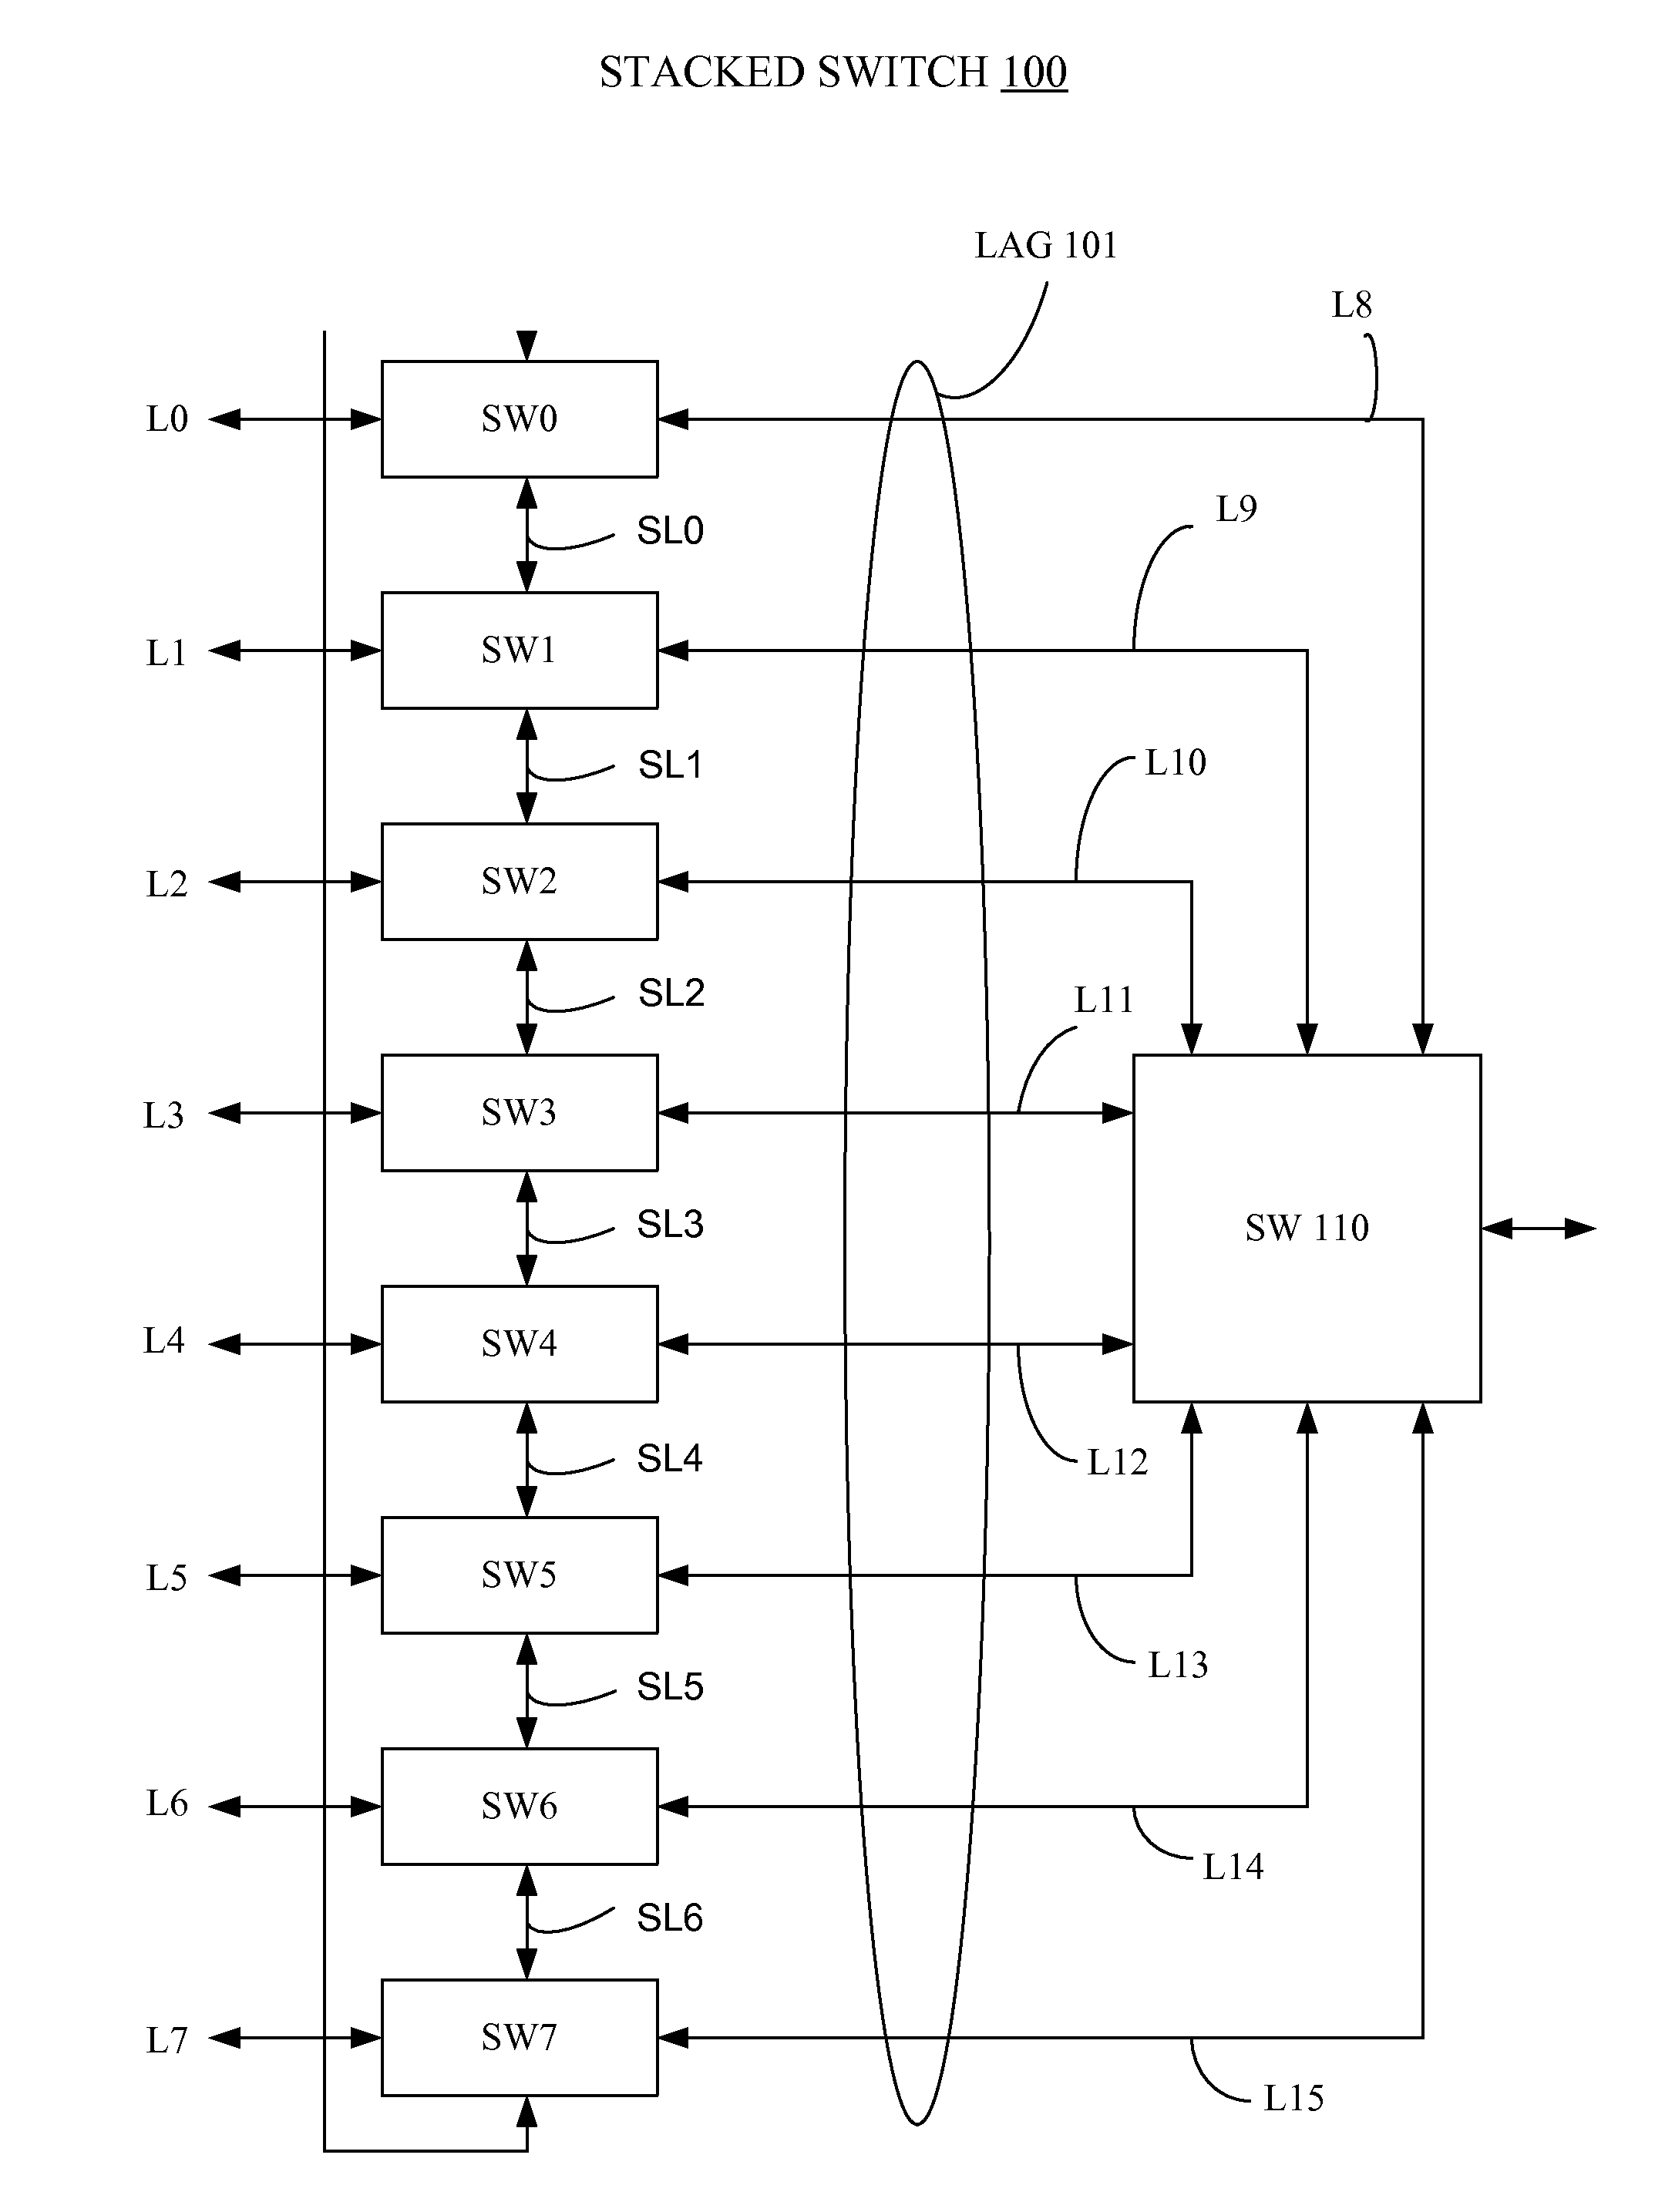 Method and apparatus for optimizing data traffic path through a stacked switch LAG configuration